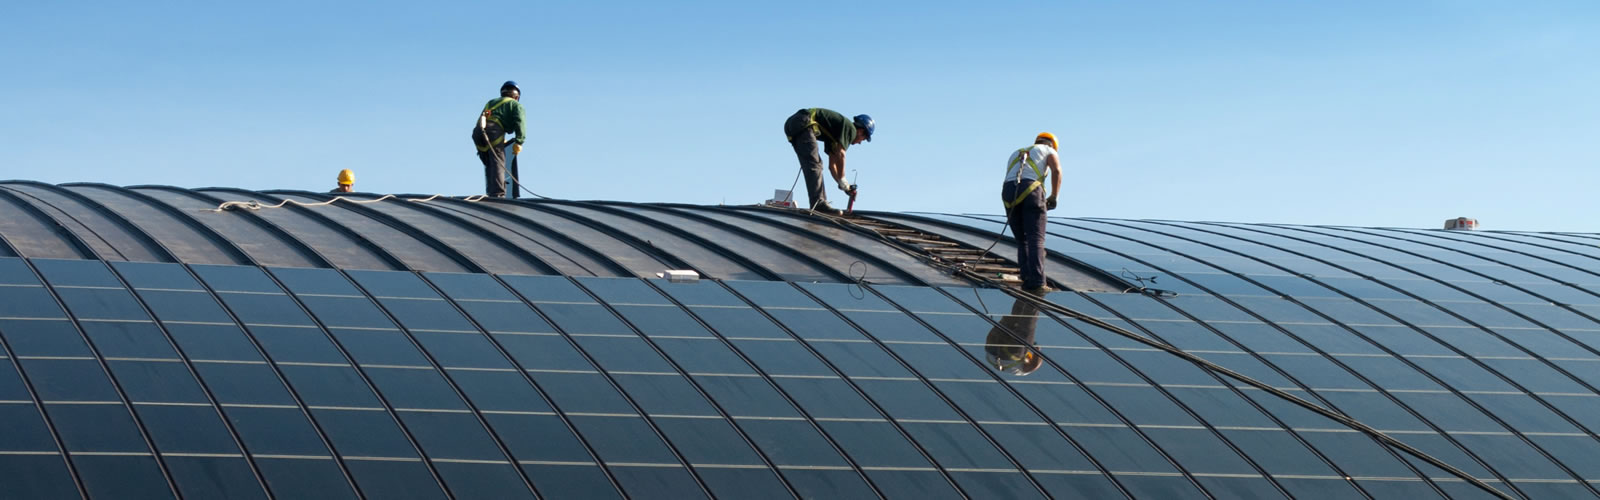 Photo of workers installing solar panels on a building rooftop.